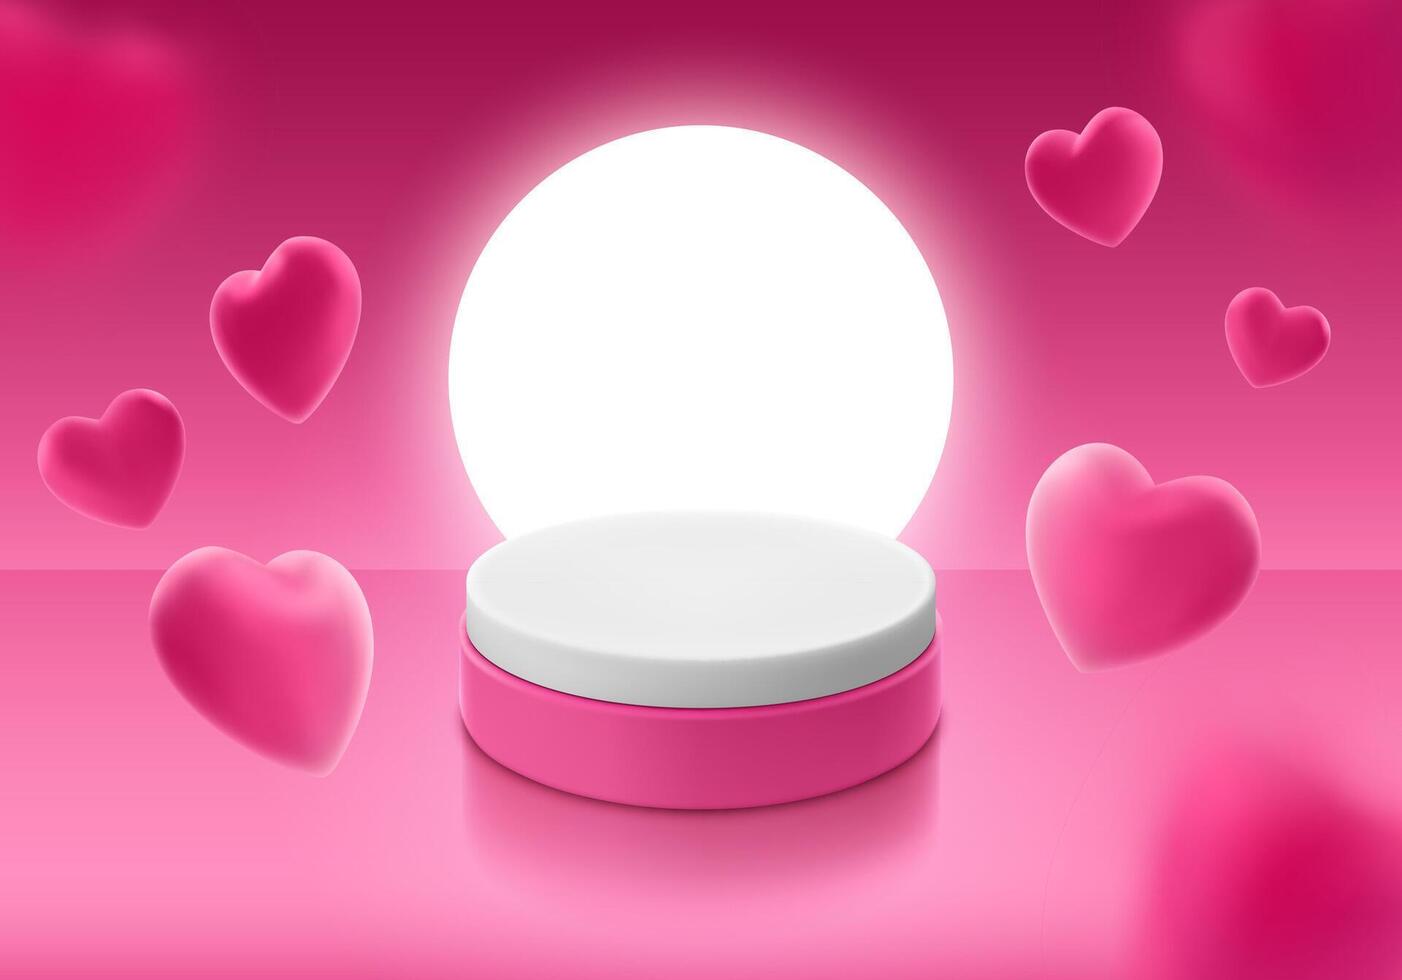 Pedestal cylindrical shape pedestal for product display on pink background with flying 3d heart shaped balloons. Vector realistic illustration for advertising banner, invitation, postcard.